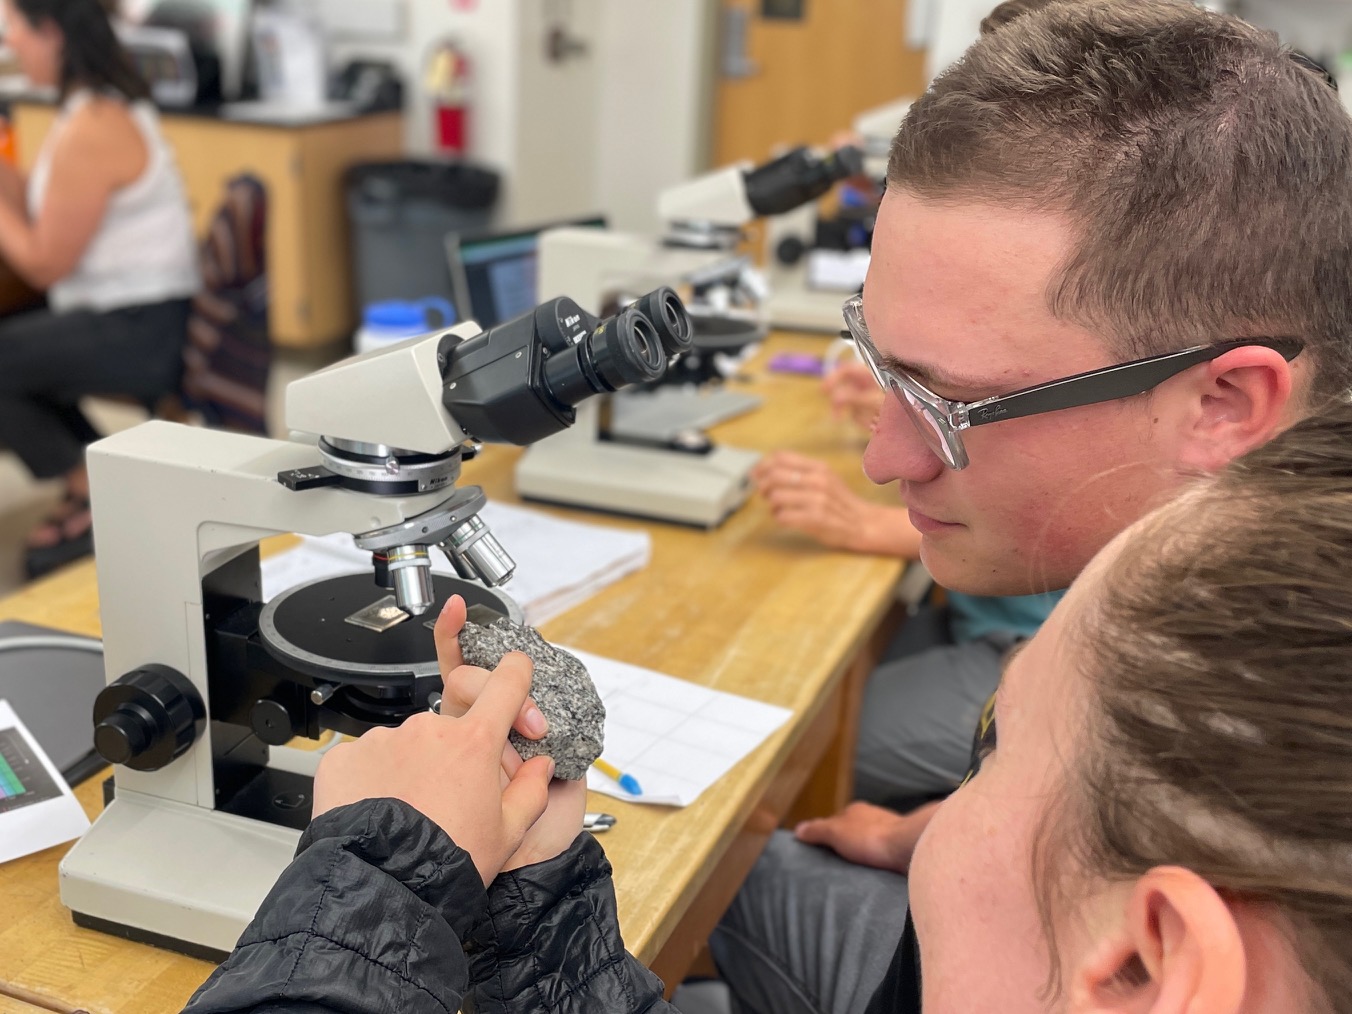 Students using scopes in lab